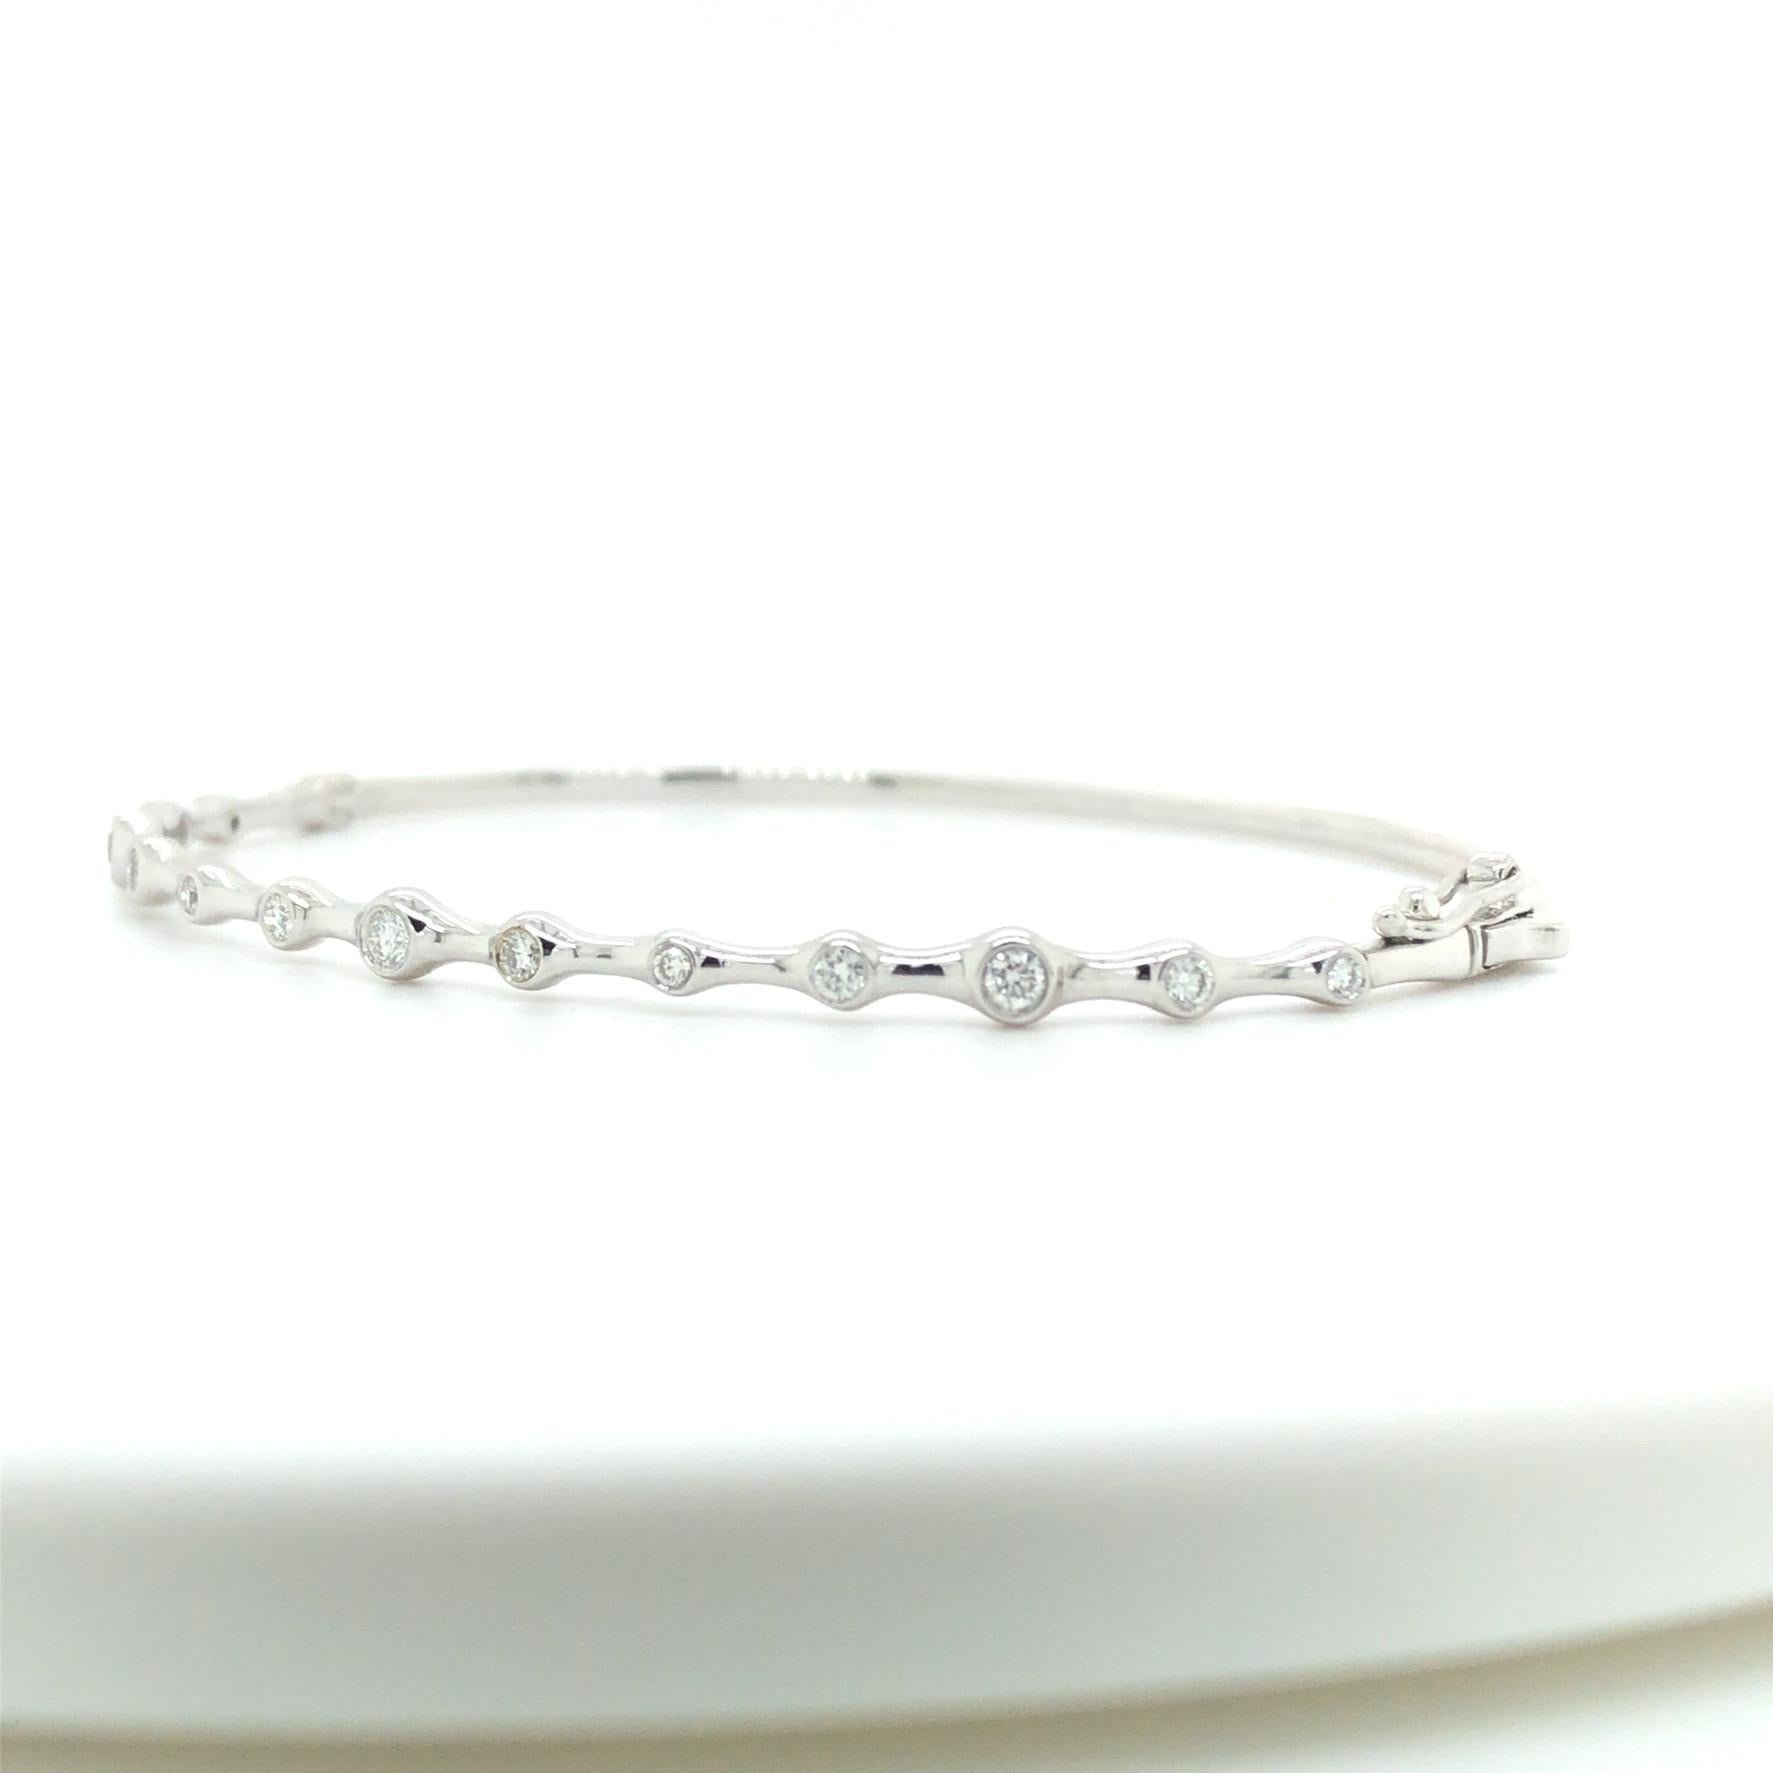 Beautiful and unique diamond bangle bracelet with 13 diamonds with a total carat weight of .37cts G color and VS2 clarity. Love this everyday bangle it by itself or stacked. 